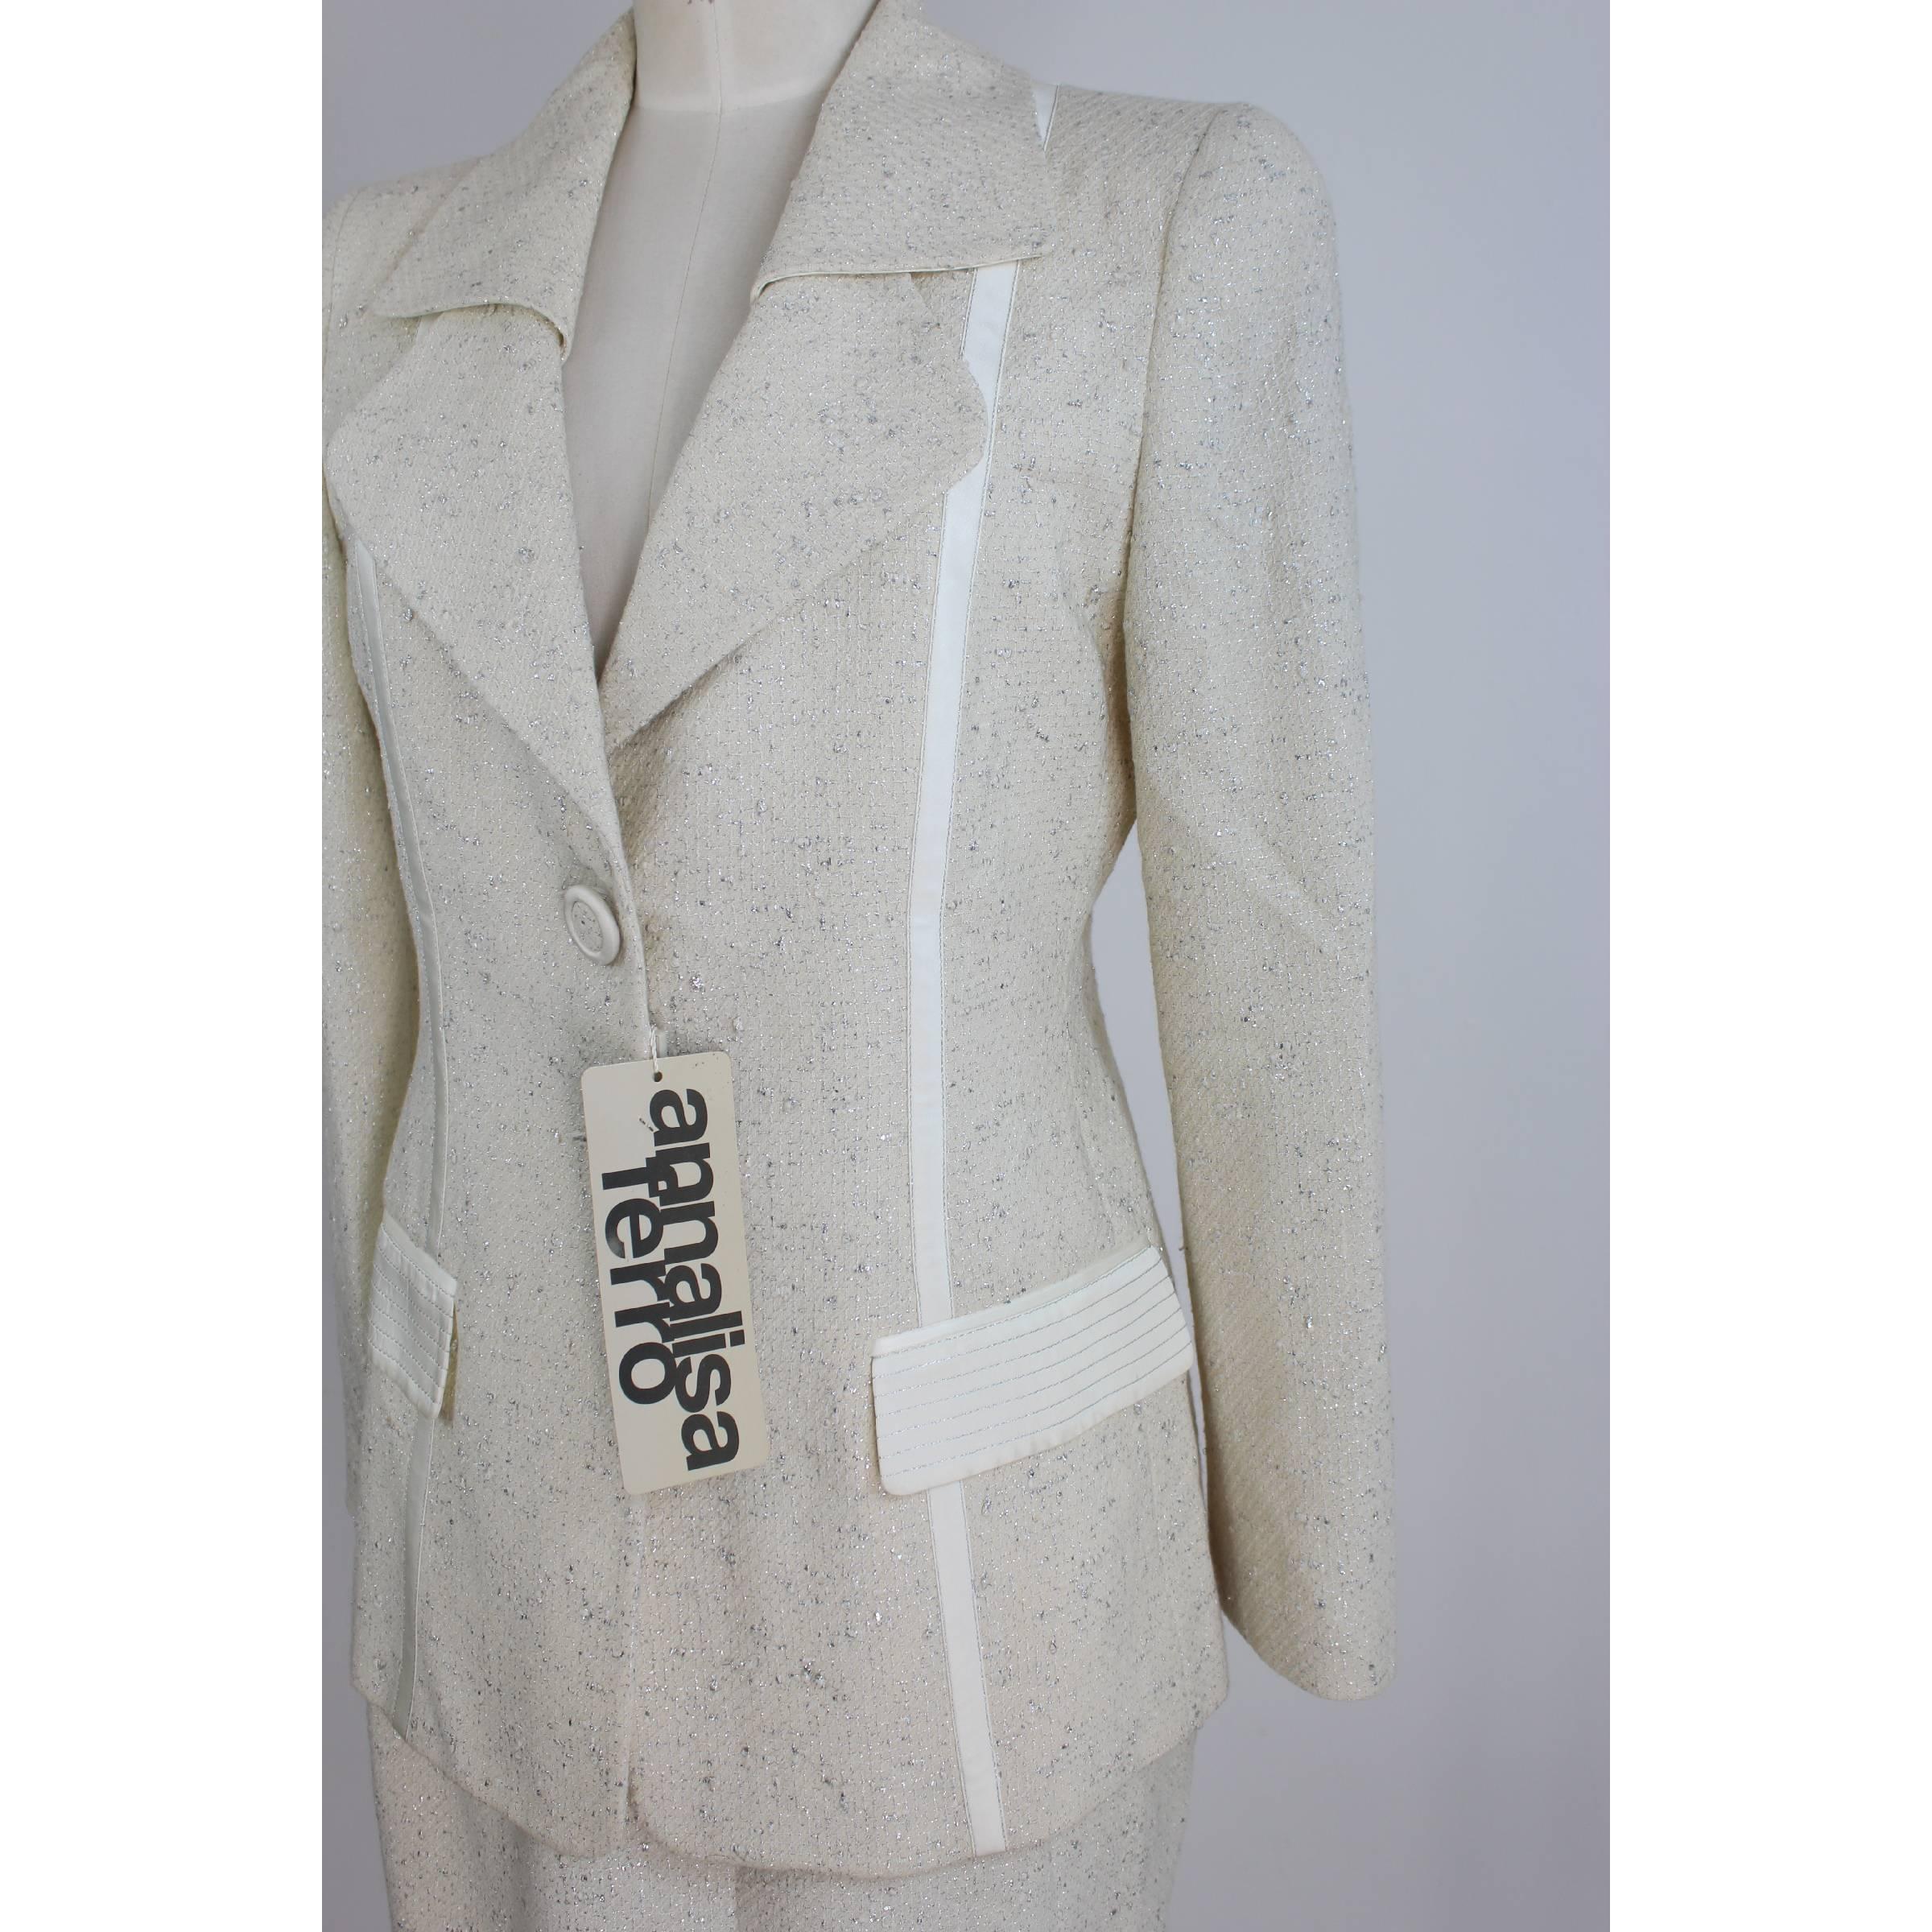 Annalisa Ferro Set Dress Wool and Cotton White Silver Italian Skirt Suit, 1980s For Sale 1